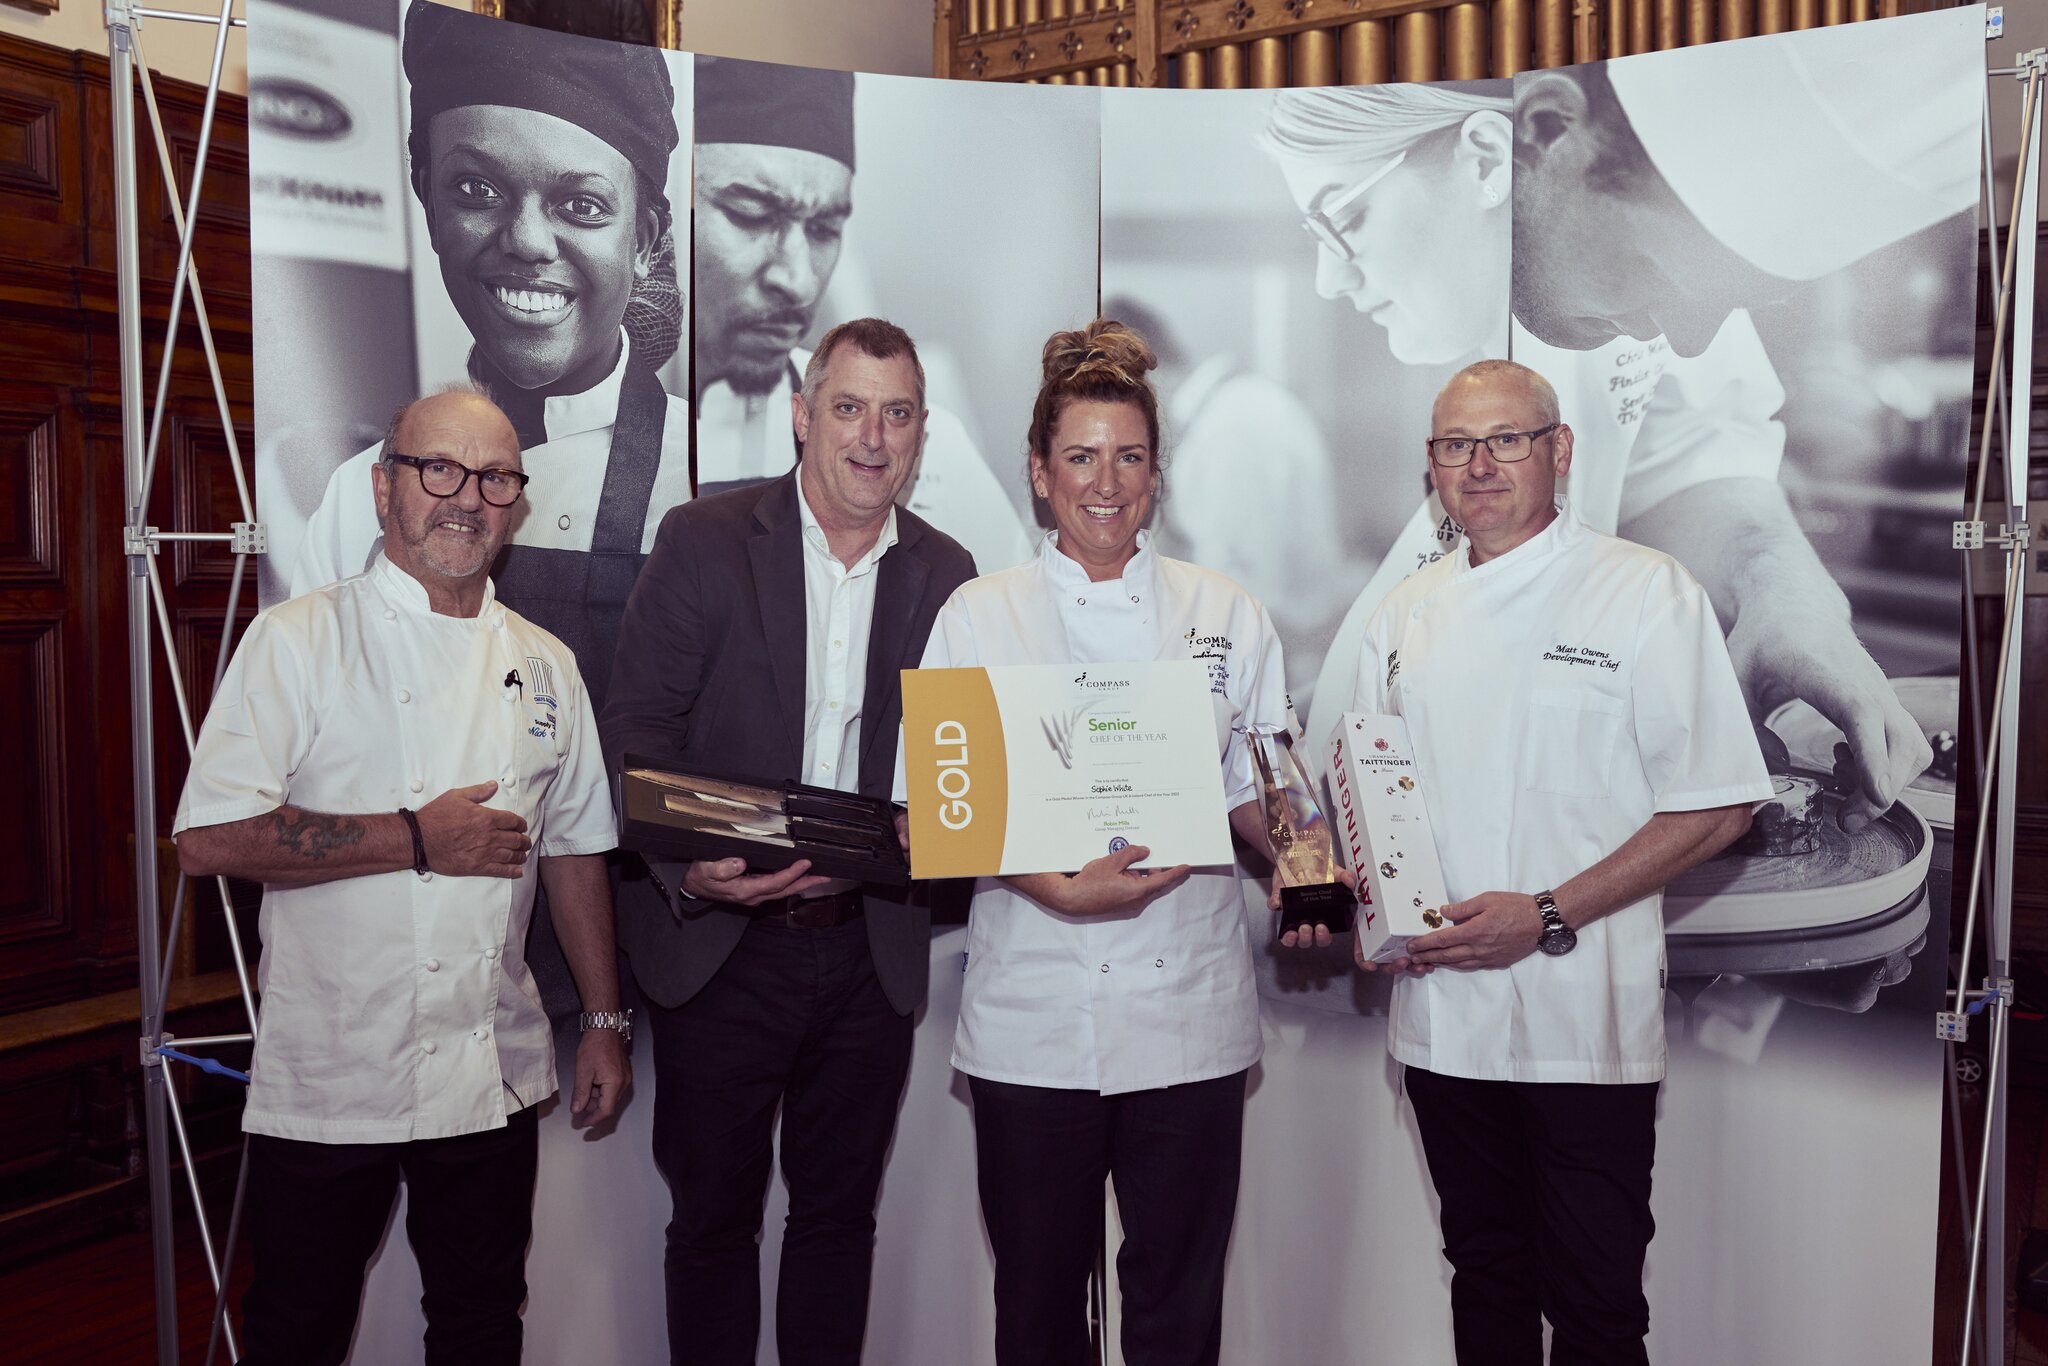 Chartwells' chefs sweep victory at Compass Chef of the Year competition